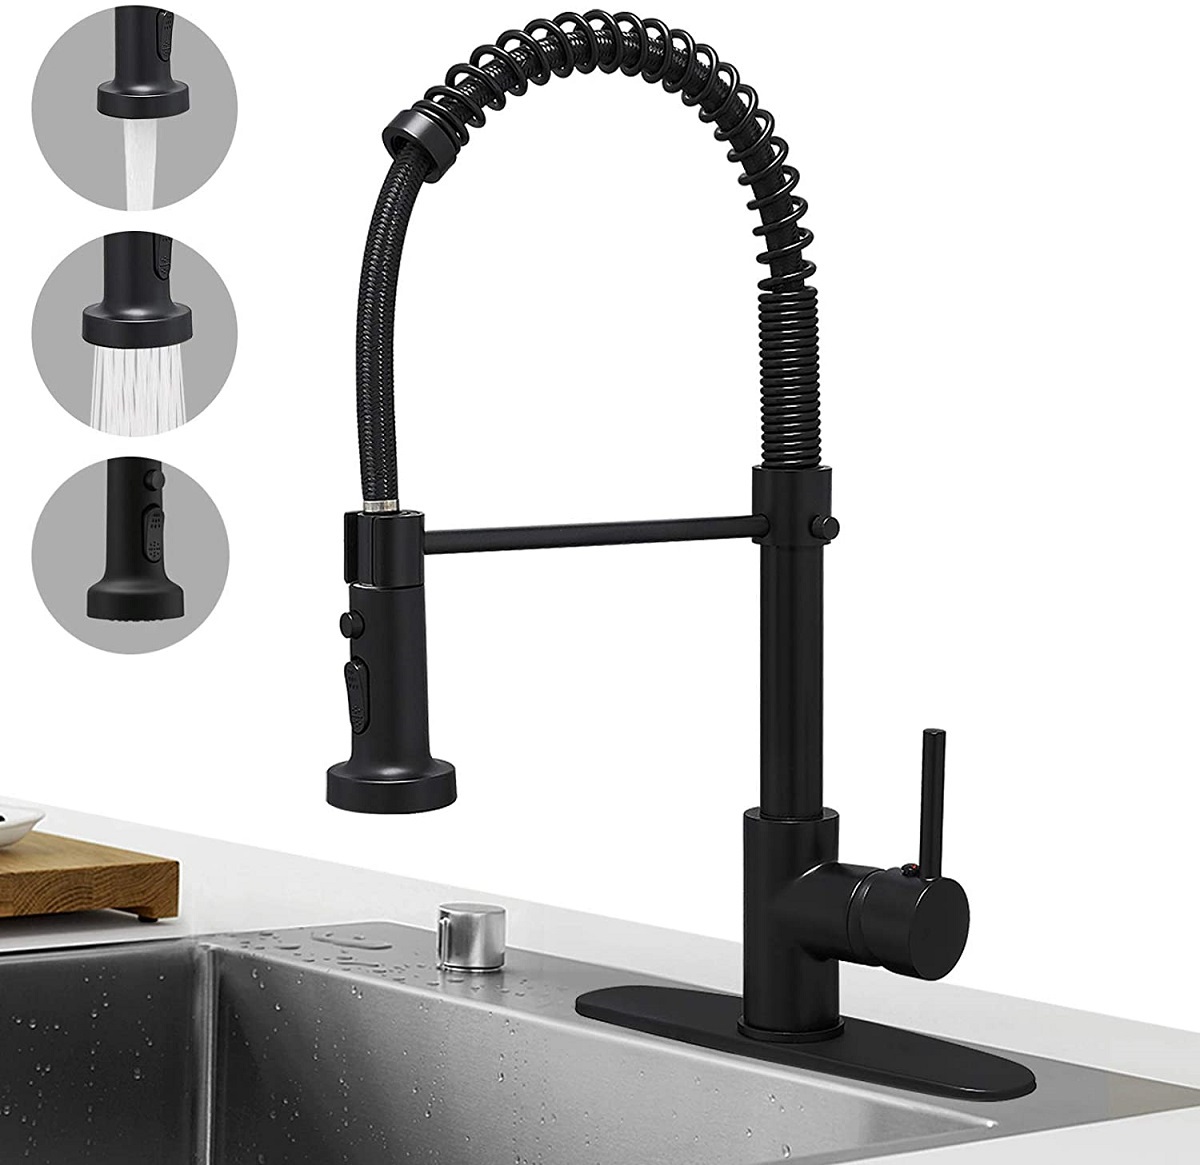 the Hoimpro kitchen faucet with pull down sprayer